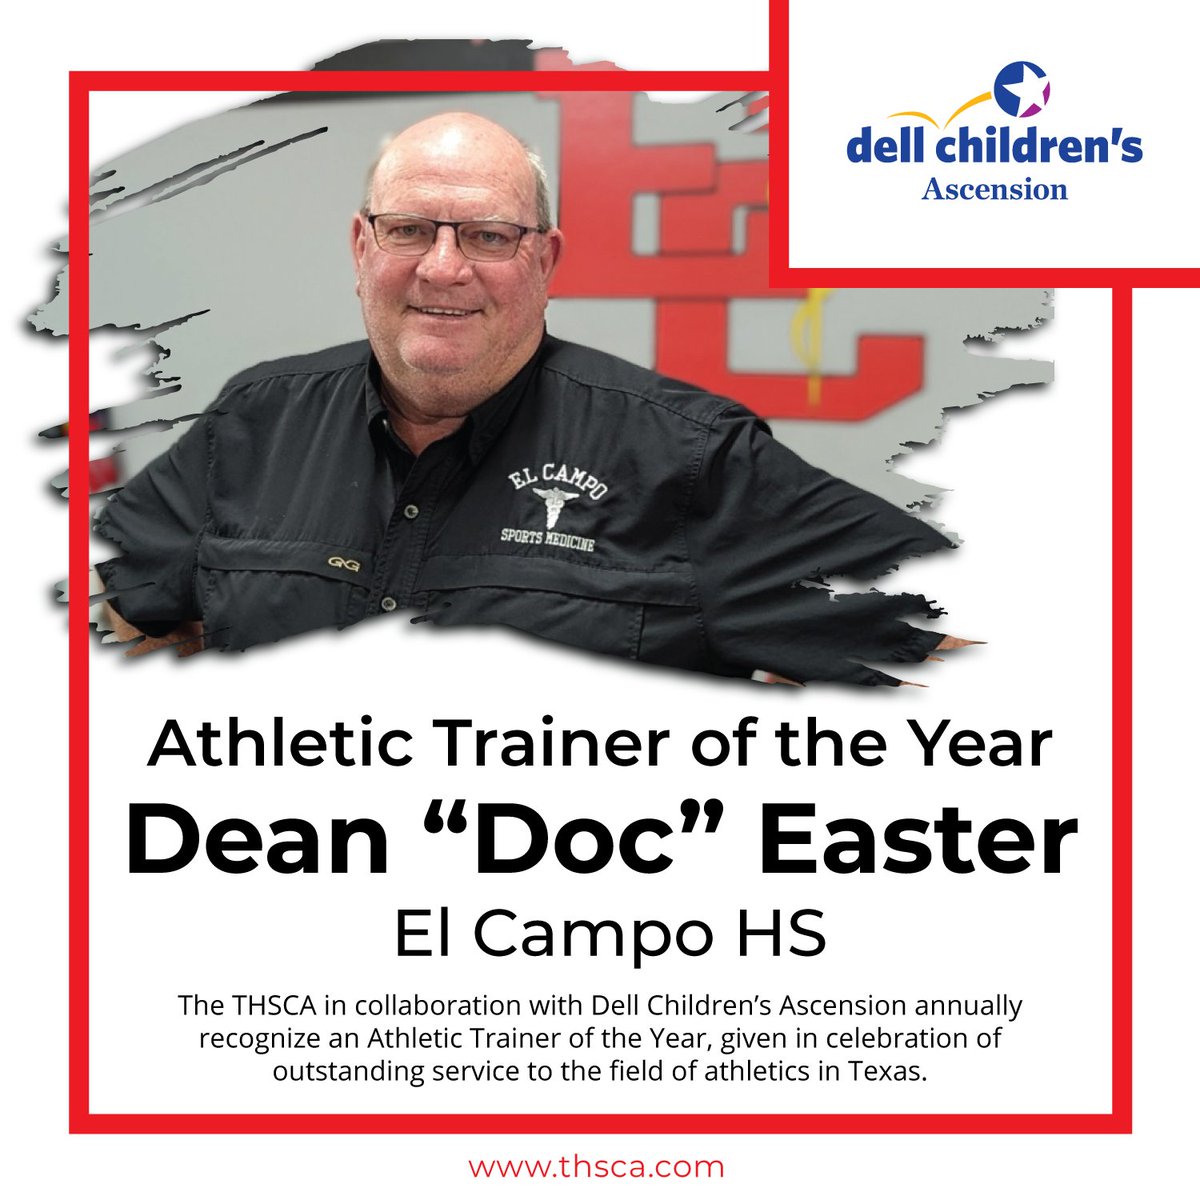 Athletic Trainer of the Year presented by Dell Children's has been awarded to 🥁... DEAN 'DOC' EASTER from El Campo HS! Thank you for keeping our athletes safe and healthy! #THSCAproud